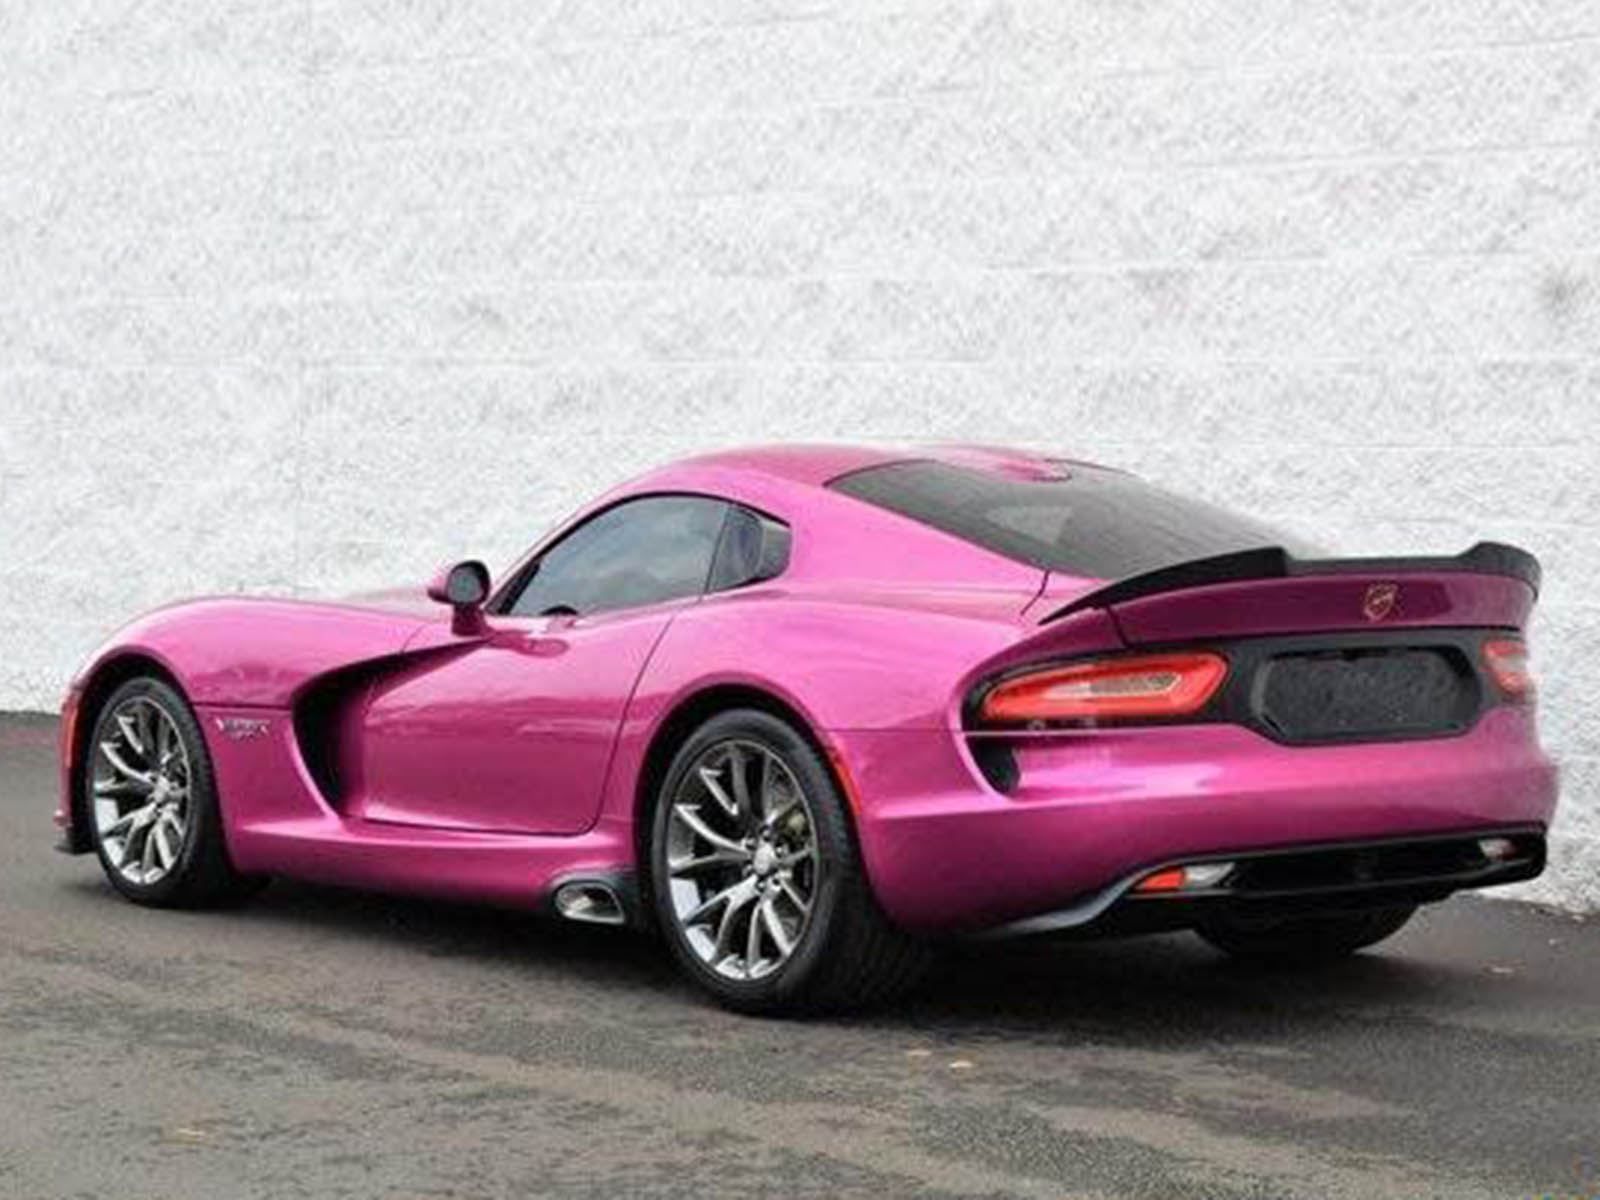 Hot Pink Sports Car - Dodge Viper Stock Image - Image of american,  reflection: 18810317